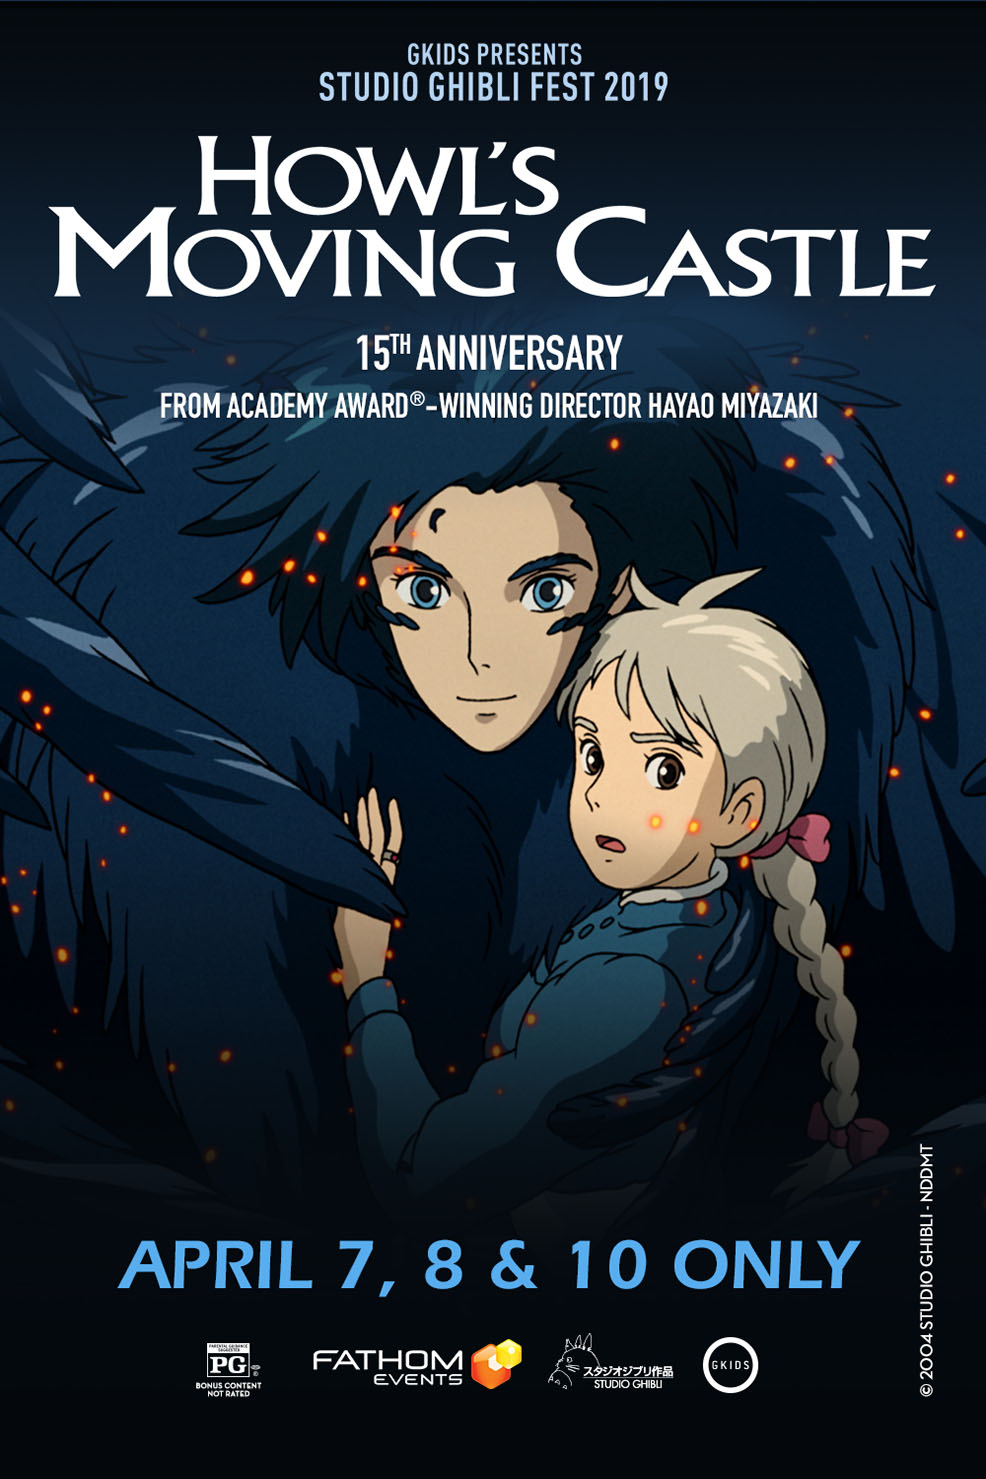 Howl’s Moving Castle Studio Ghibli Fest 2019 at an AMC Theatre near you.